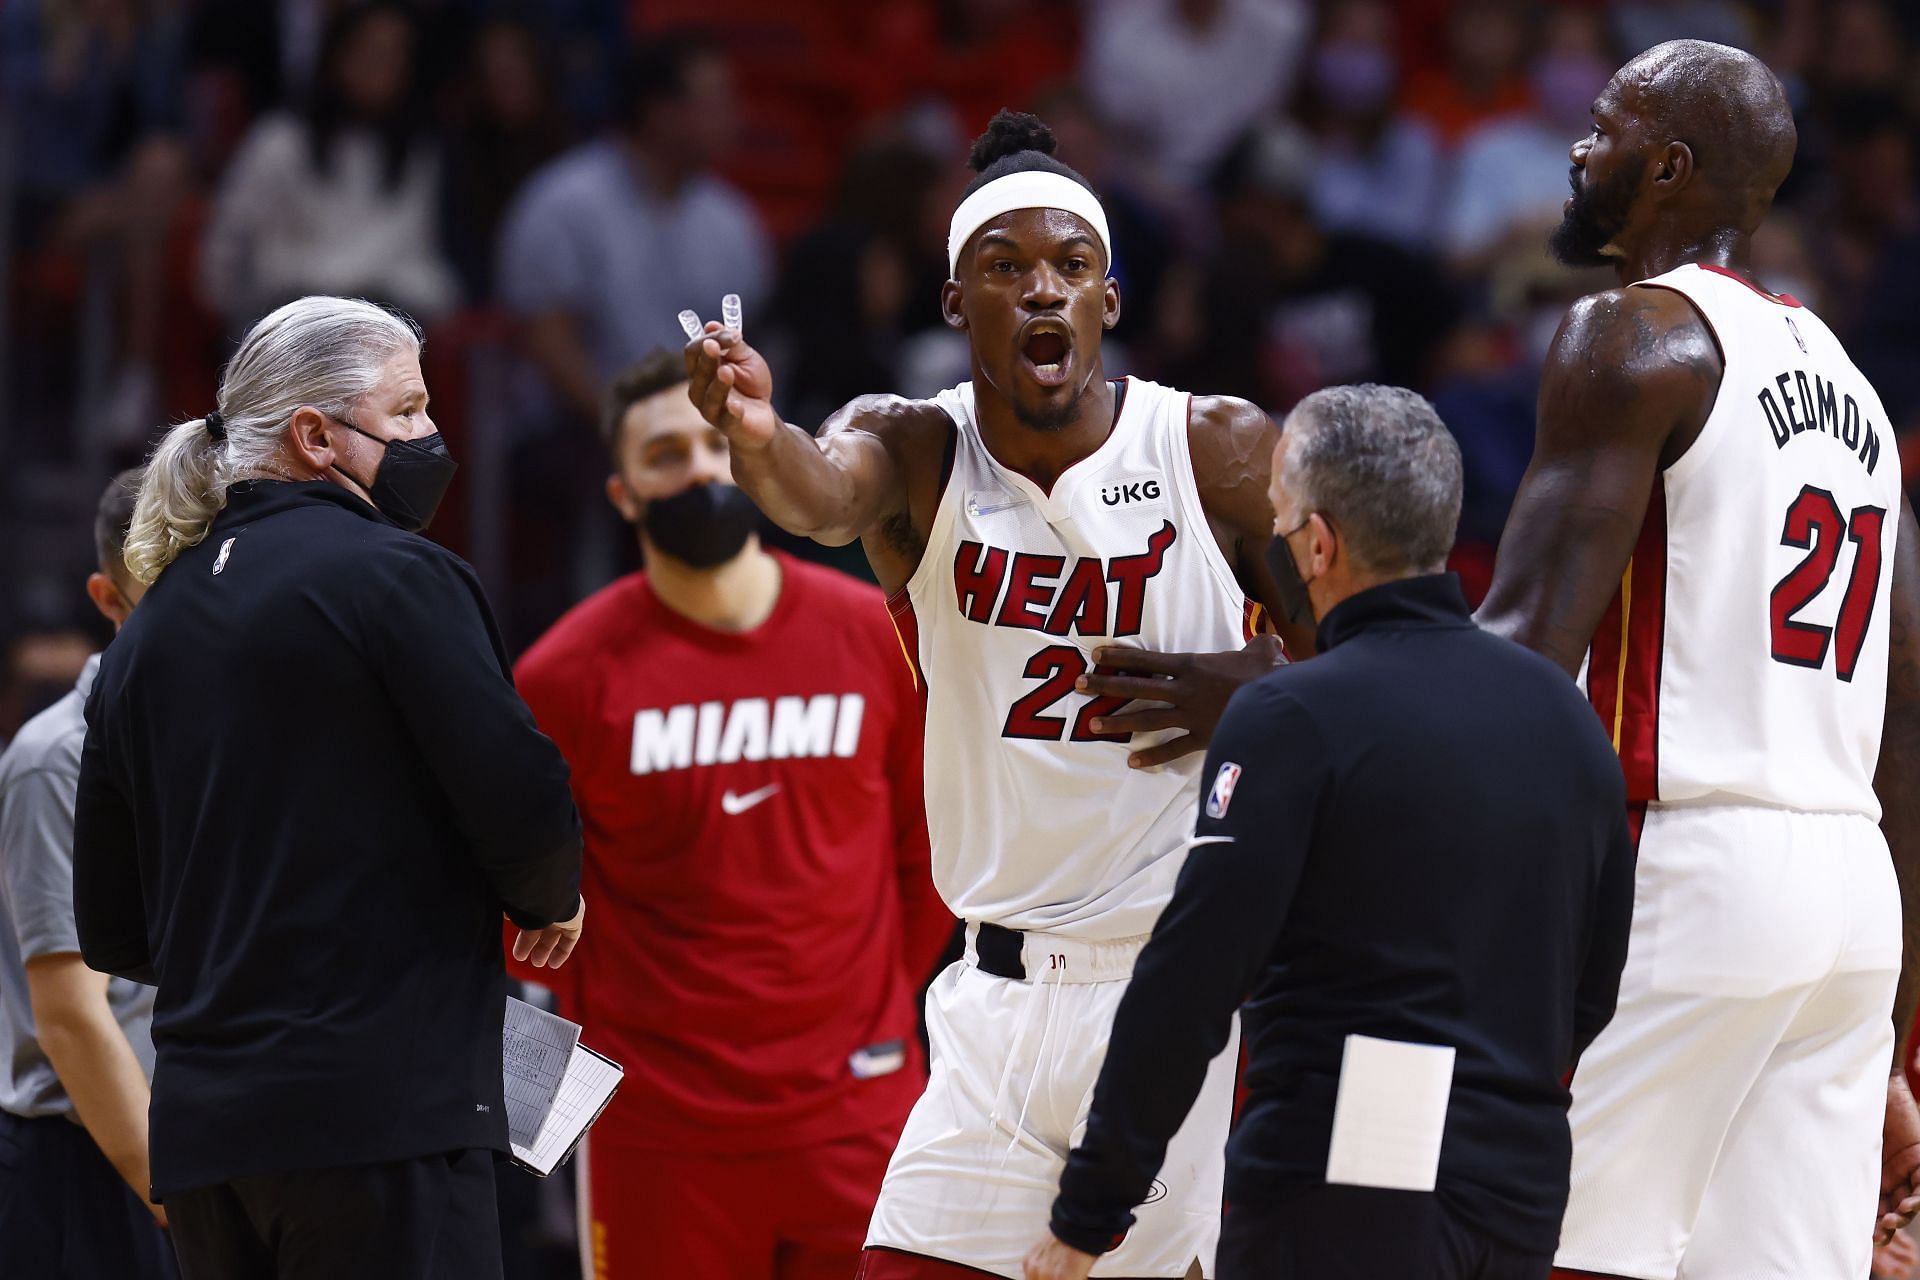 The Miami Heat are high on confidence after a stellar win over the Milwaukee Bucks on Wednesday